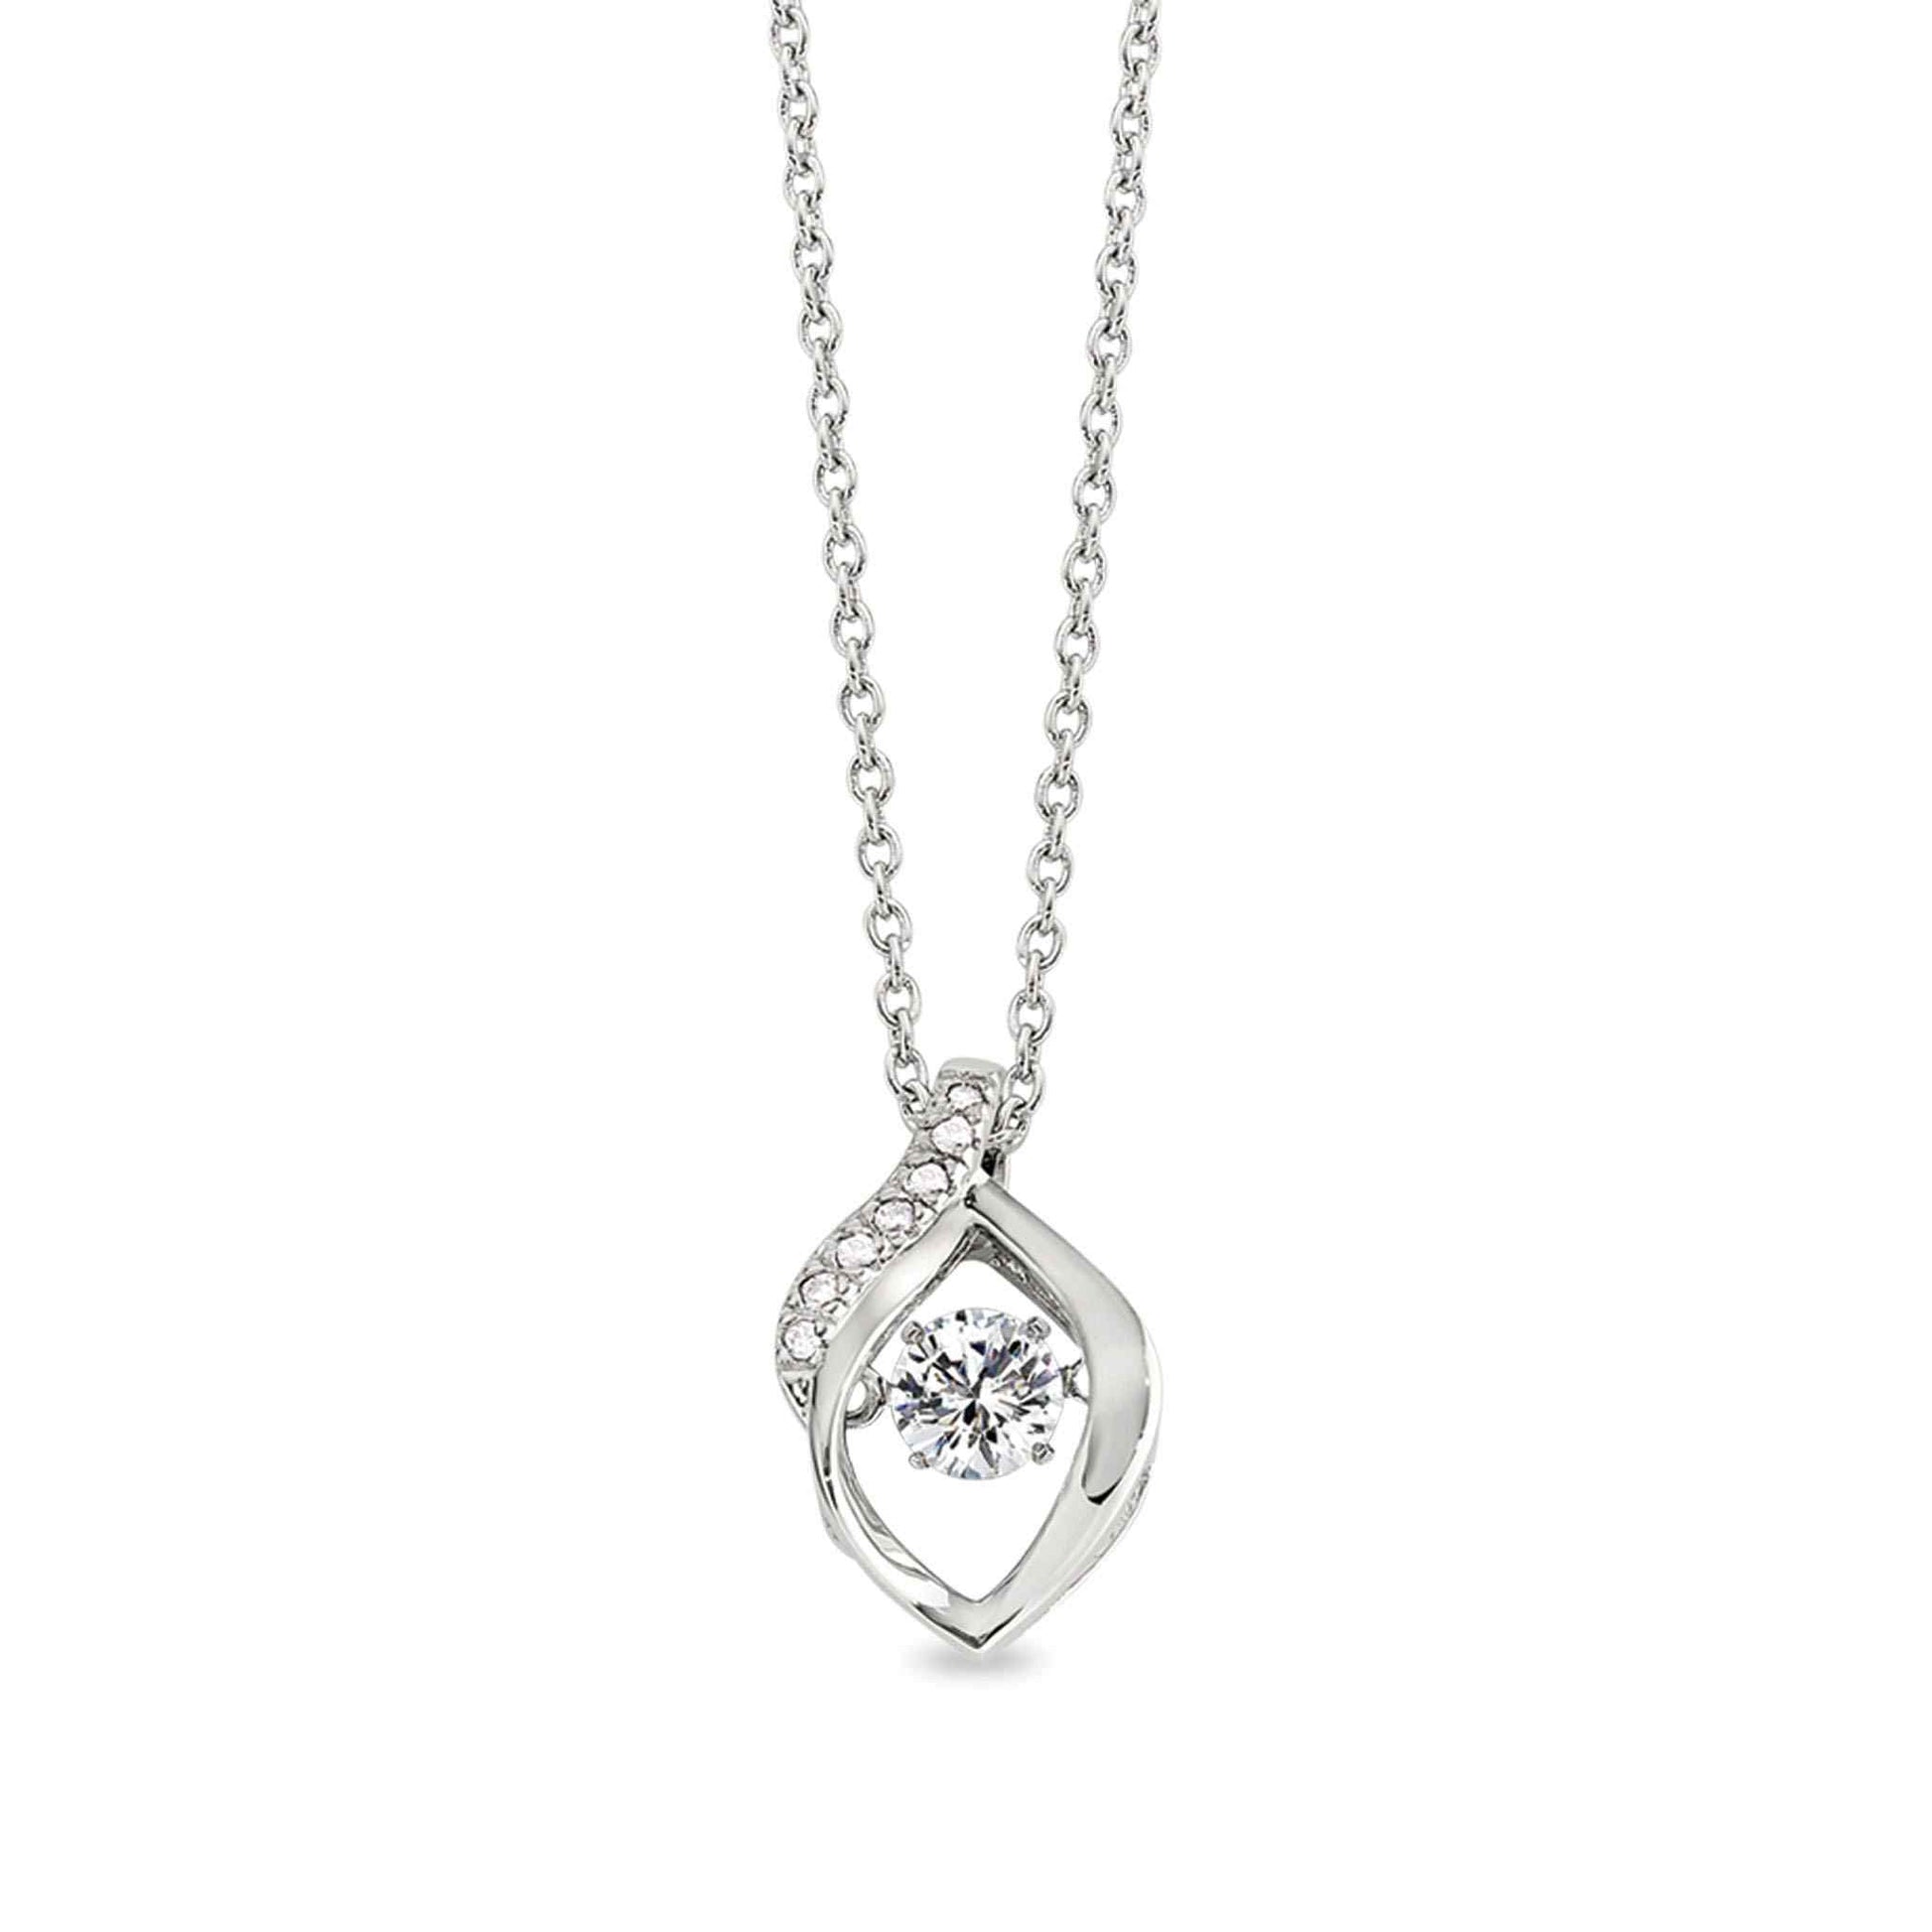 A dancing stone flame shaped pendant with simulated diamonds displayed on a neutral white background.